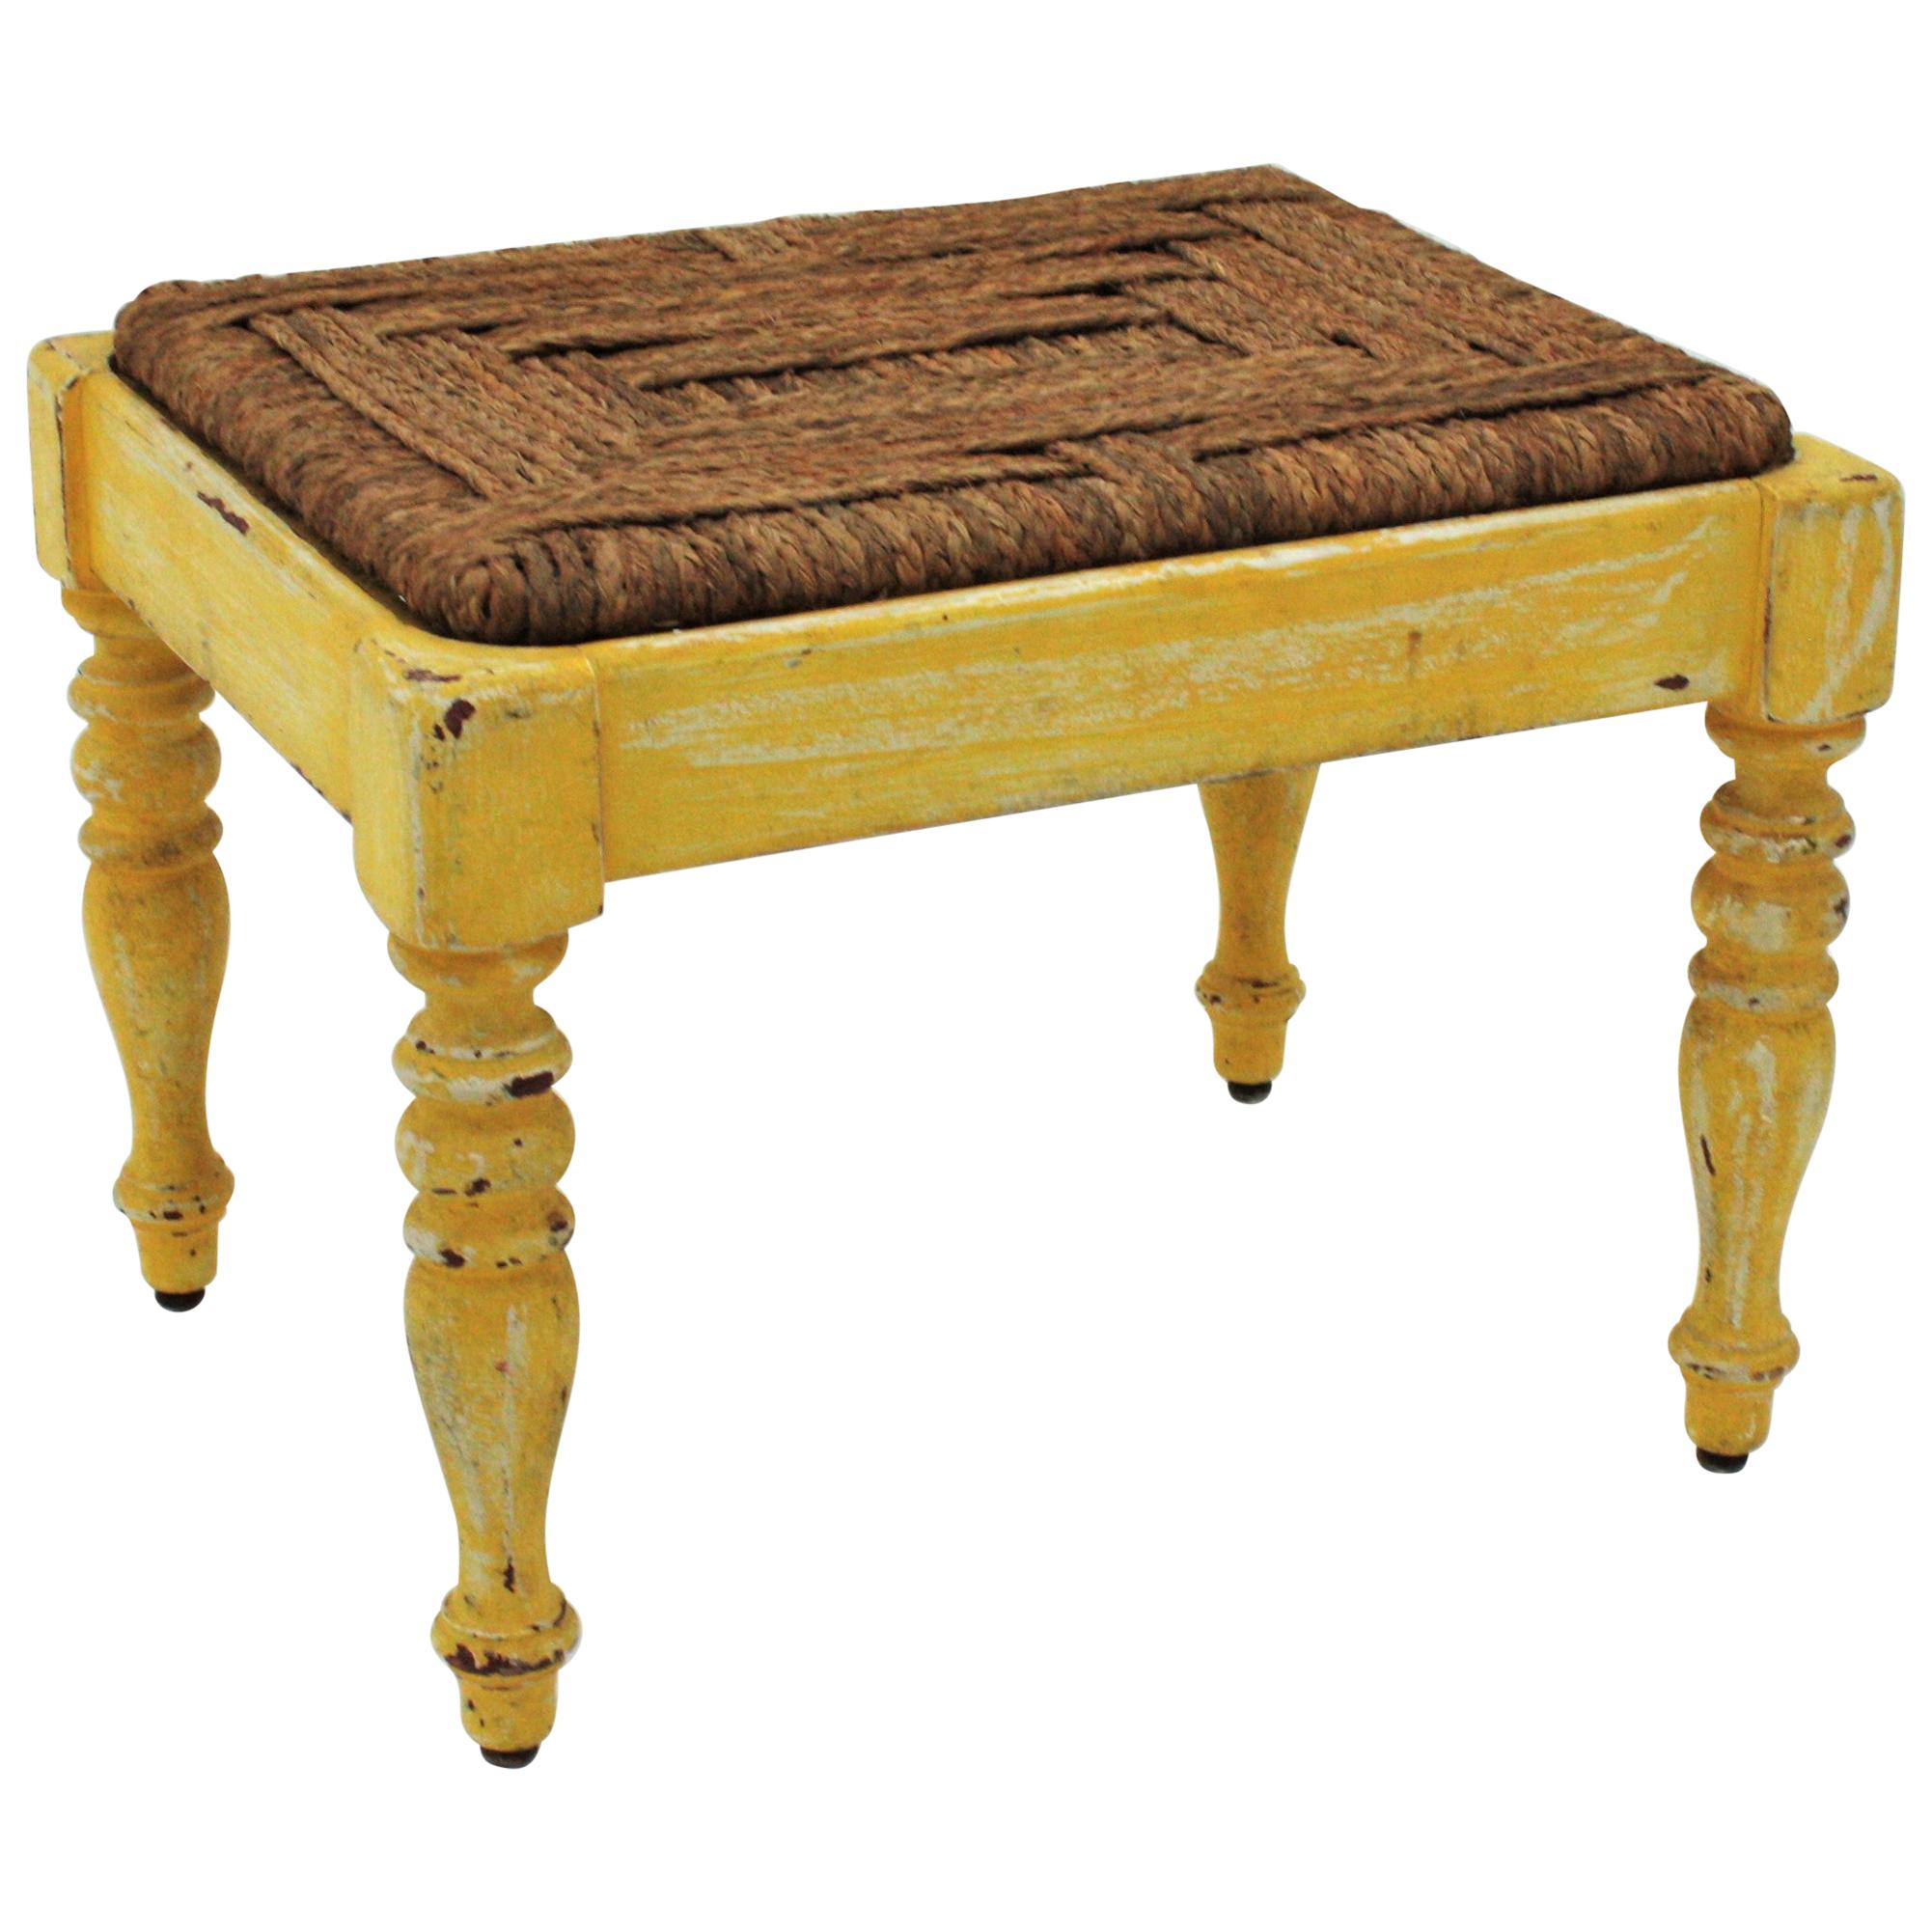 French Rustic Stool with Esparto Grass Seat and Yellow Patina For Sale